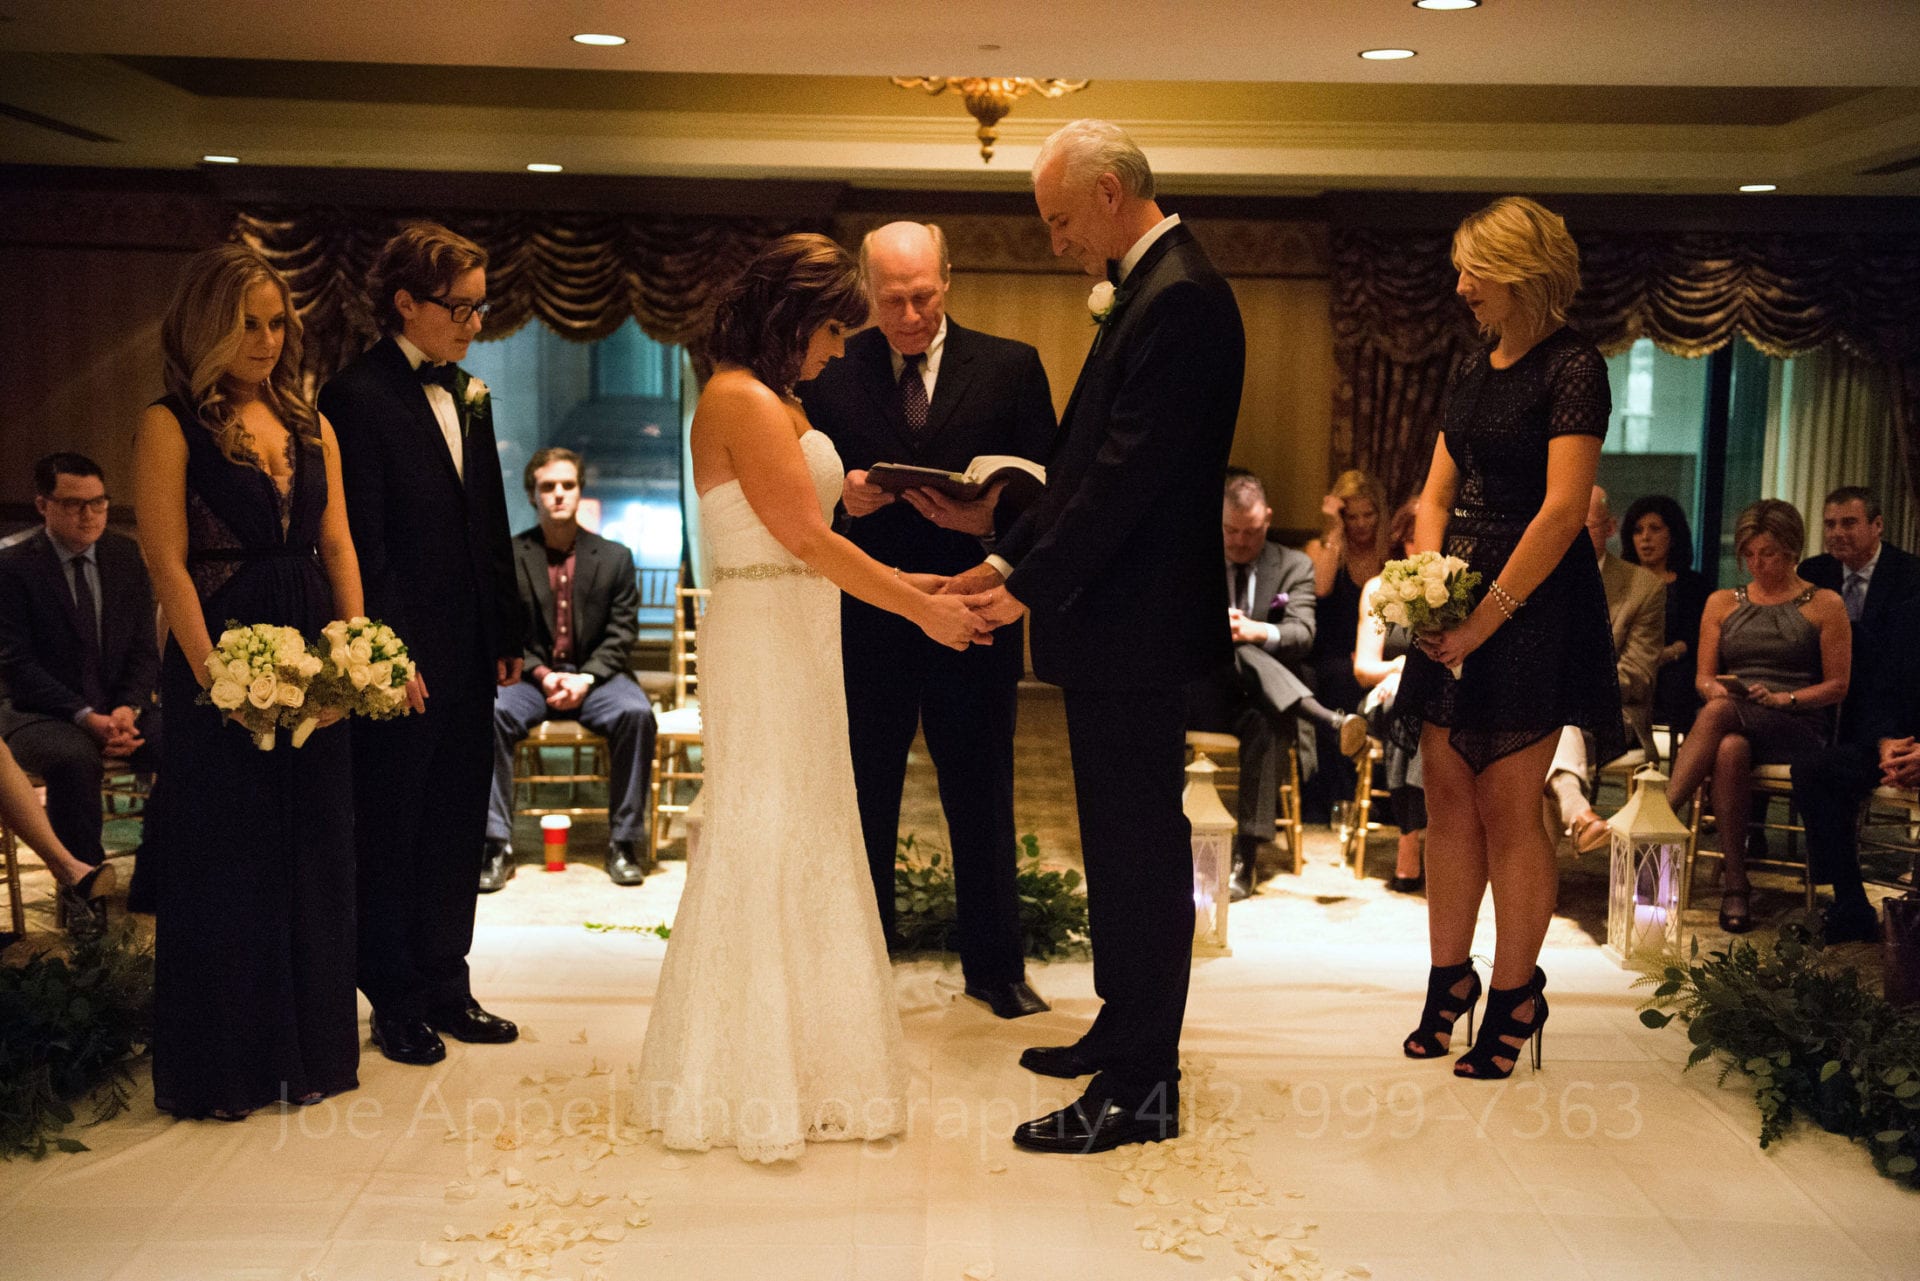 guests surround a bride and groom saying their vows